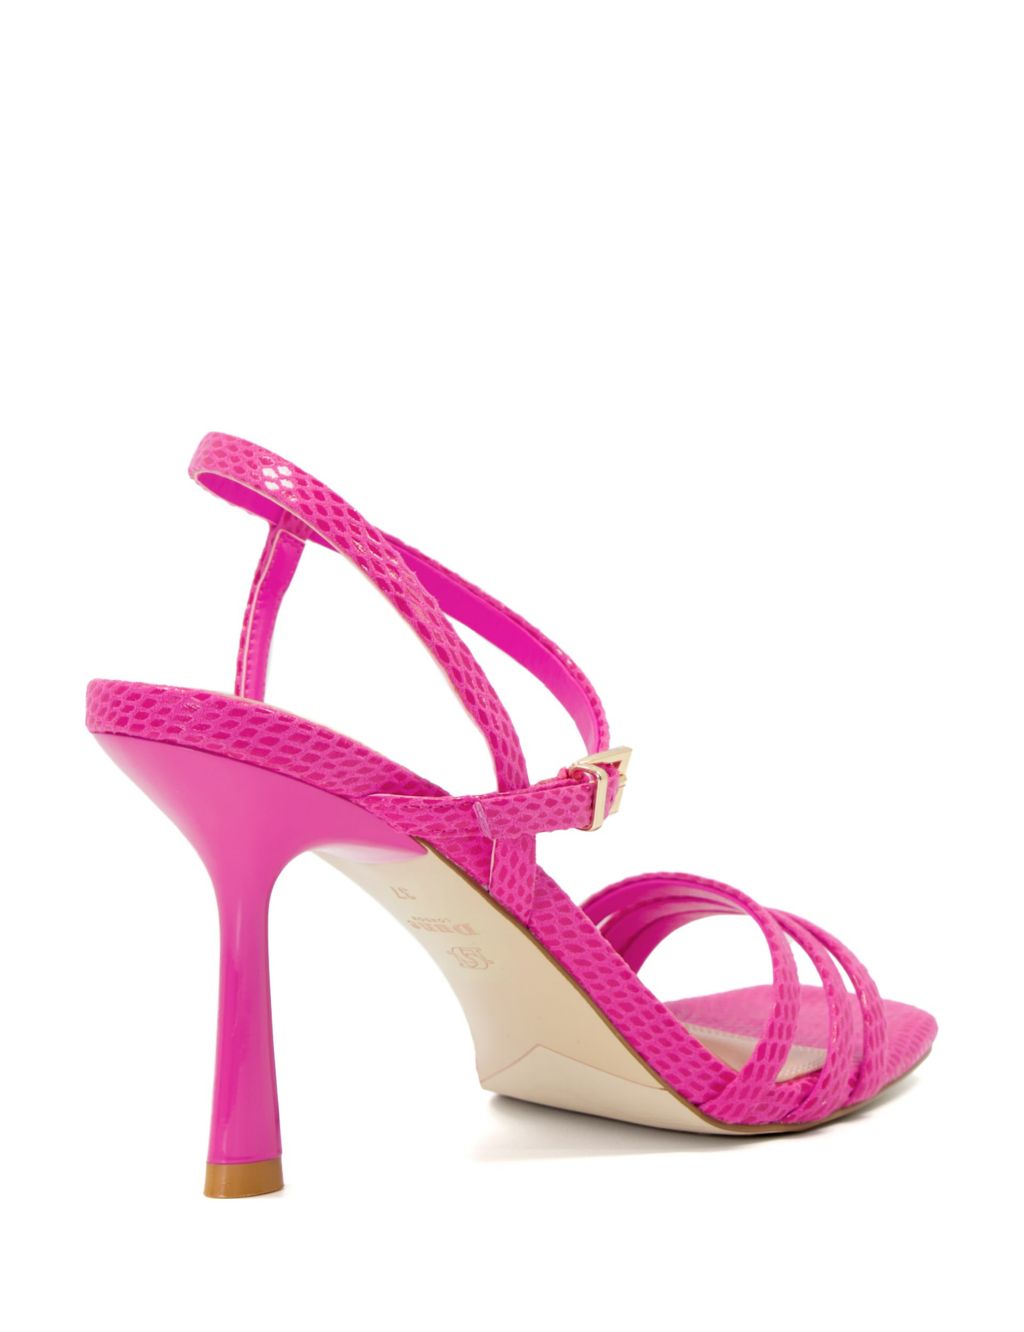 Leather Ankle Strap Stiletto Heel Sandals image 4